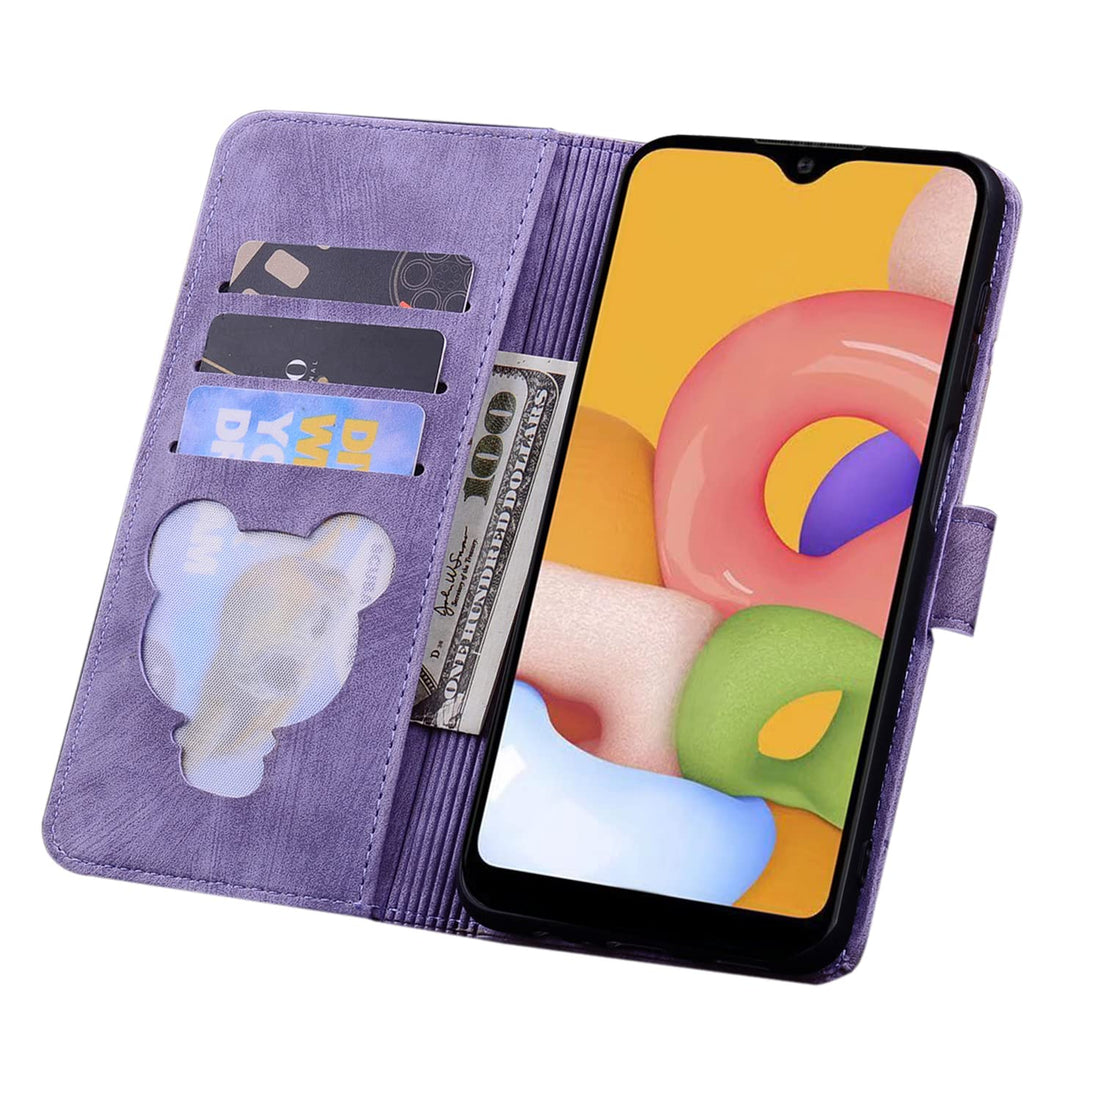 Rosbtib Flip Case for Samsung Galaxy A54 5G Cover, Premium PU Leather Magnetic Closure Case with Flip Wallet Stand Function Cover for Galaxy A54 5g 6.4 Inch - Cherry Cat Purple